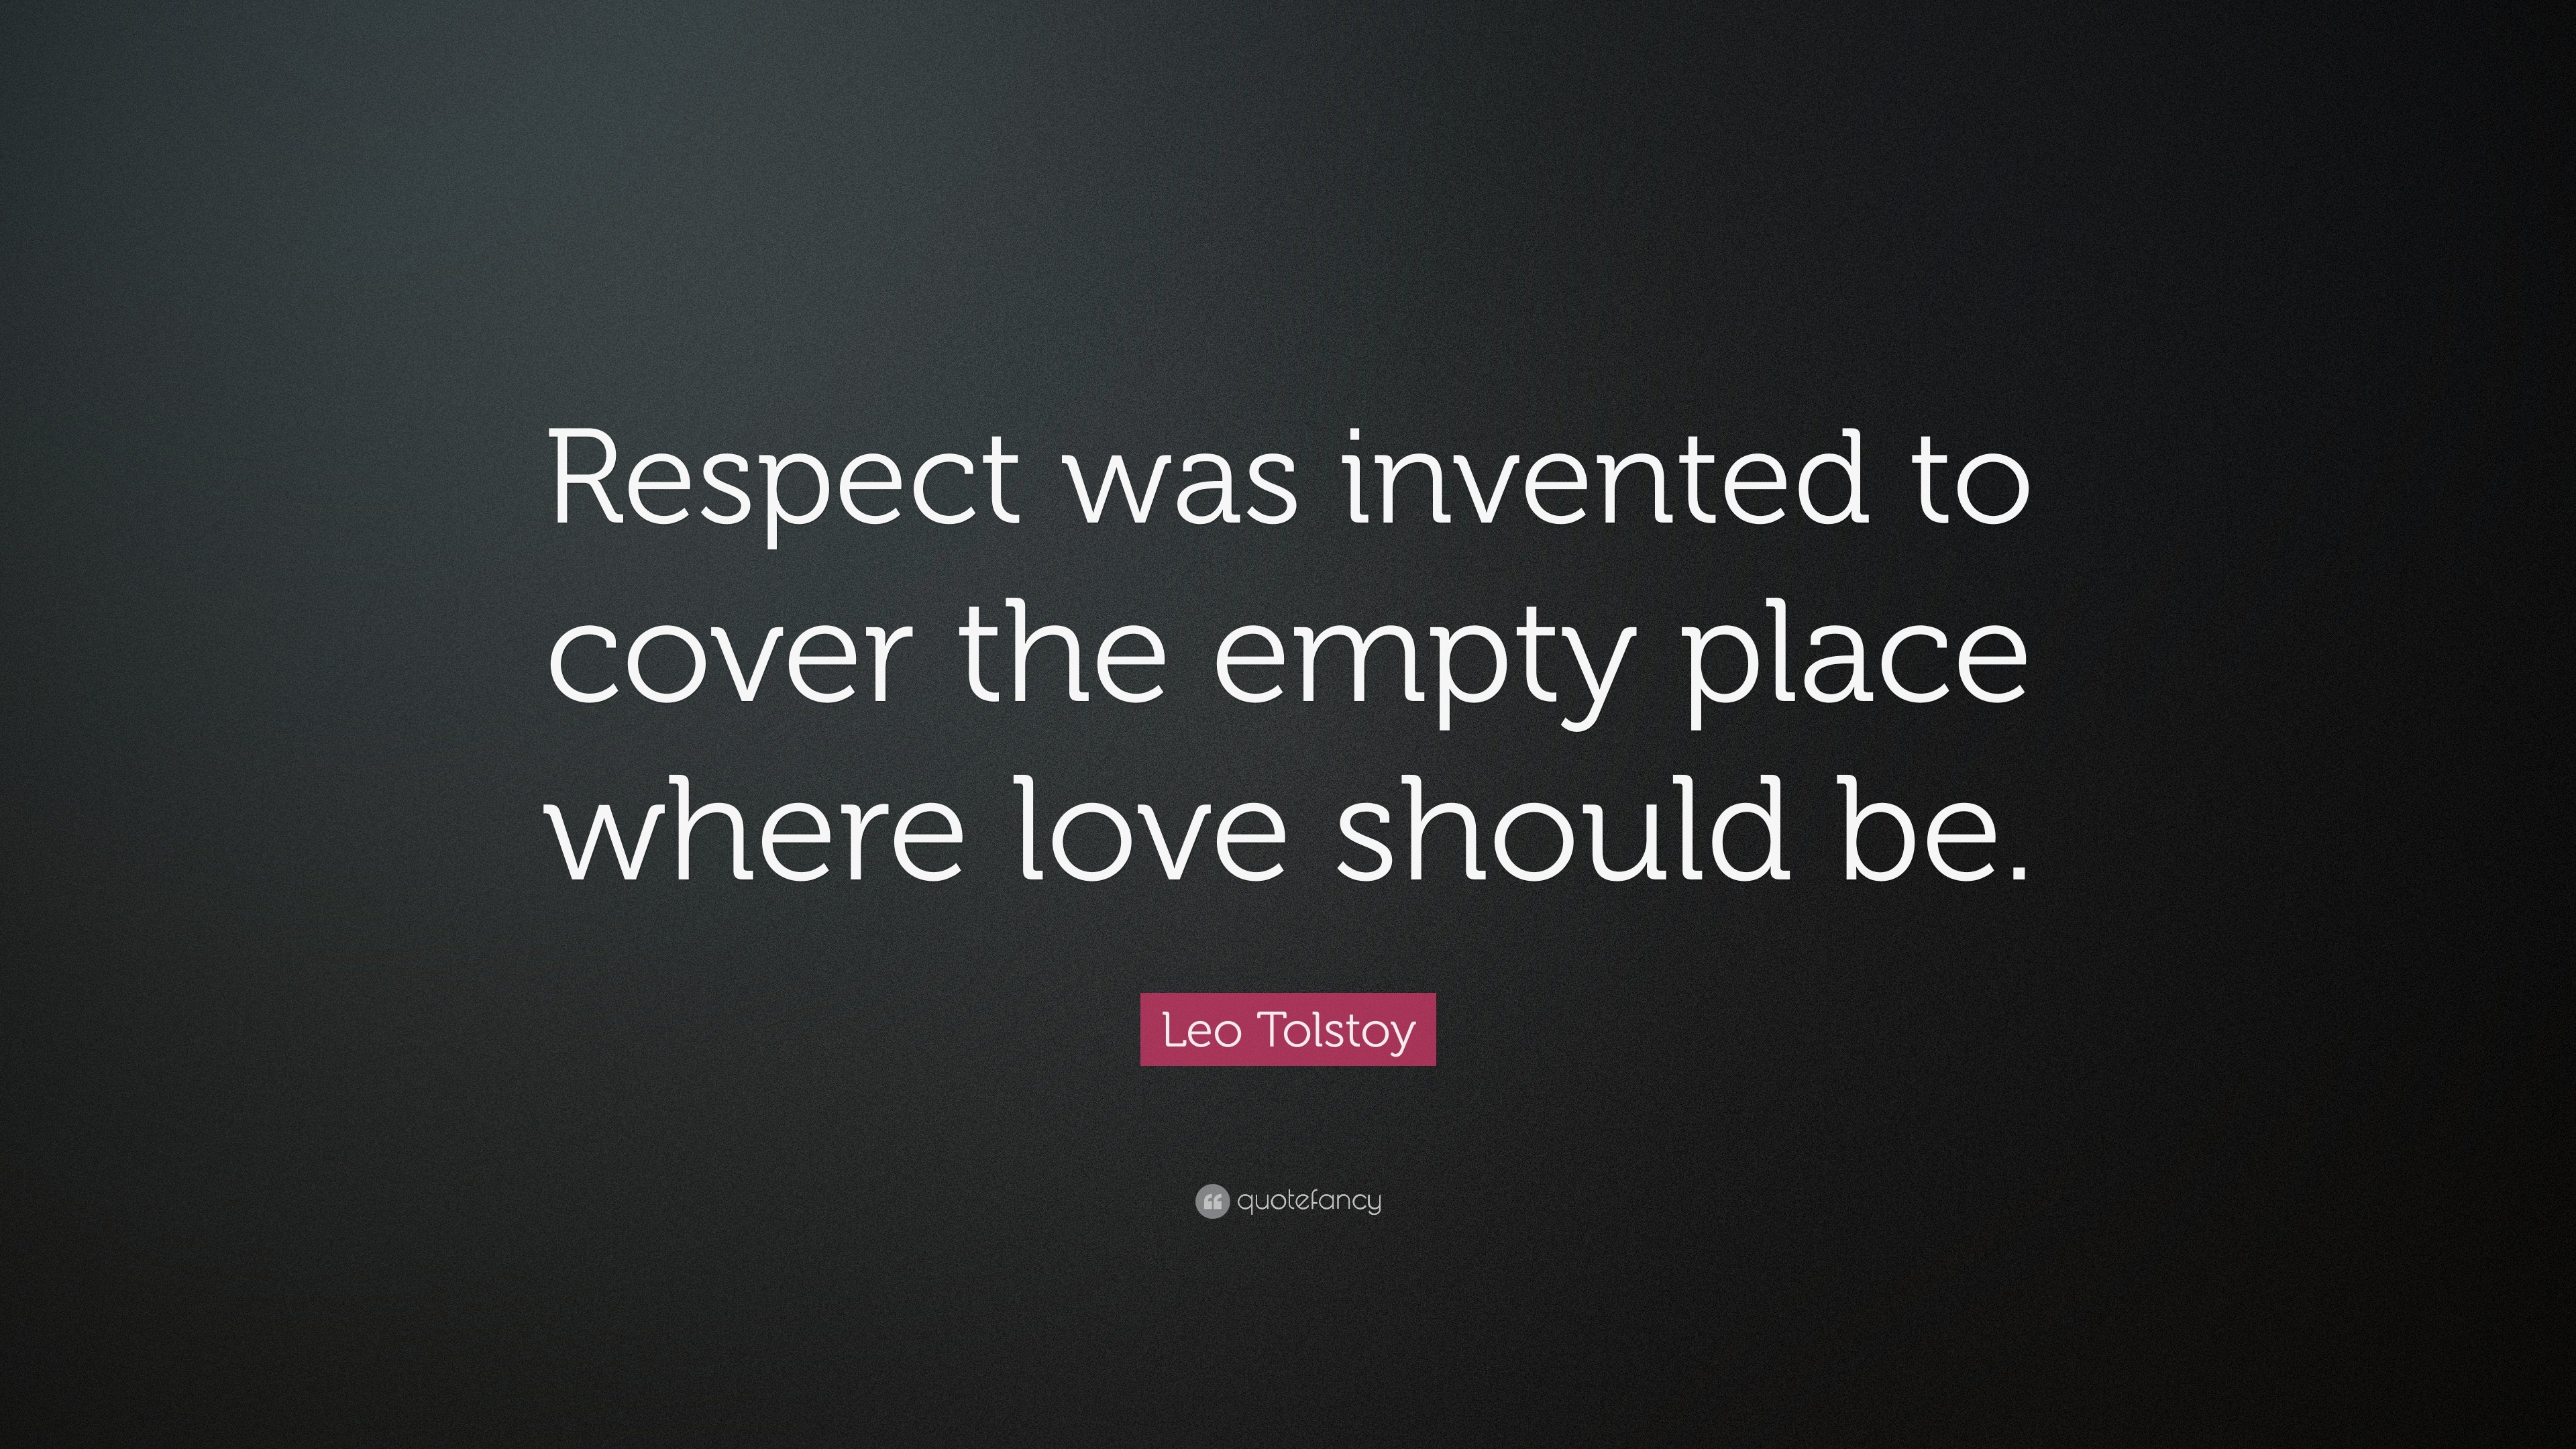 Leo Tolstoy Quote “Respect was invented to cover the empty place where love should